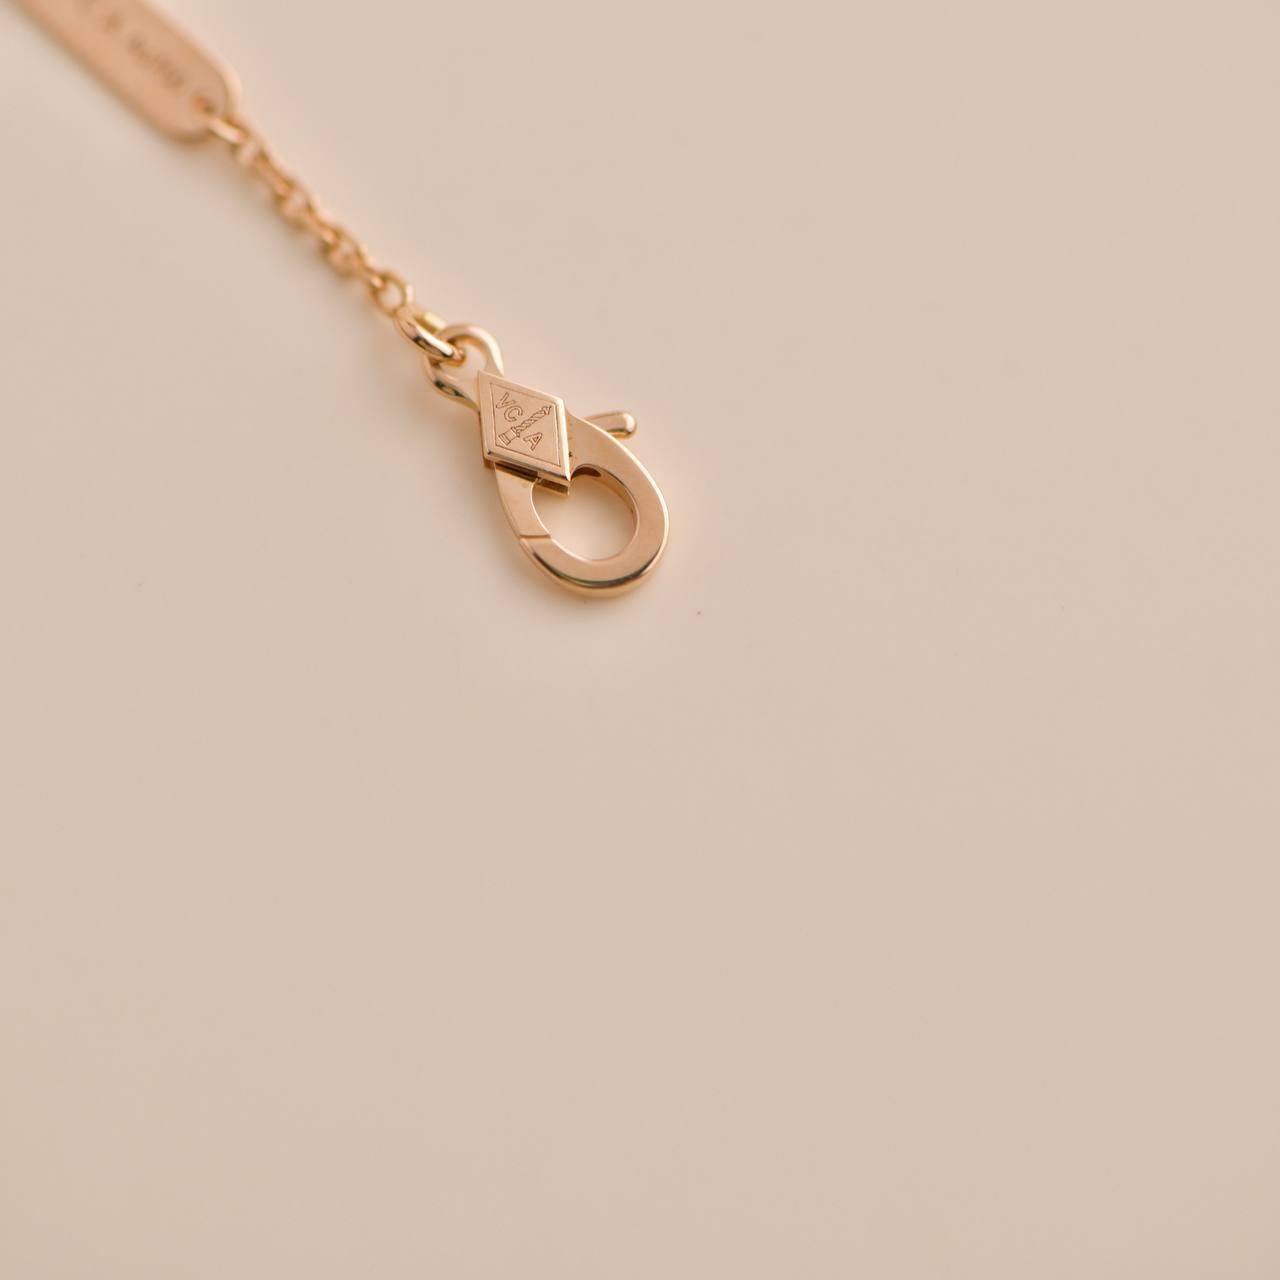 Van Cleef & Arpels Vintage Alhambra Onyx Rose Gold 2016 Holiday Pendant Necklace In Excellent Condition For Sale In Banbury, GB